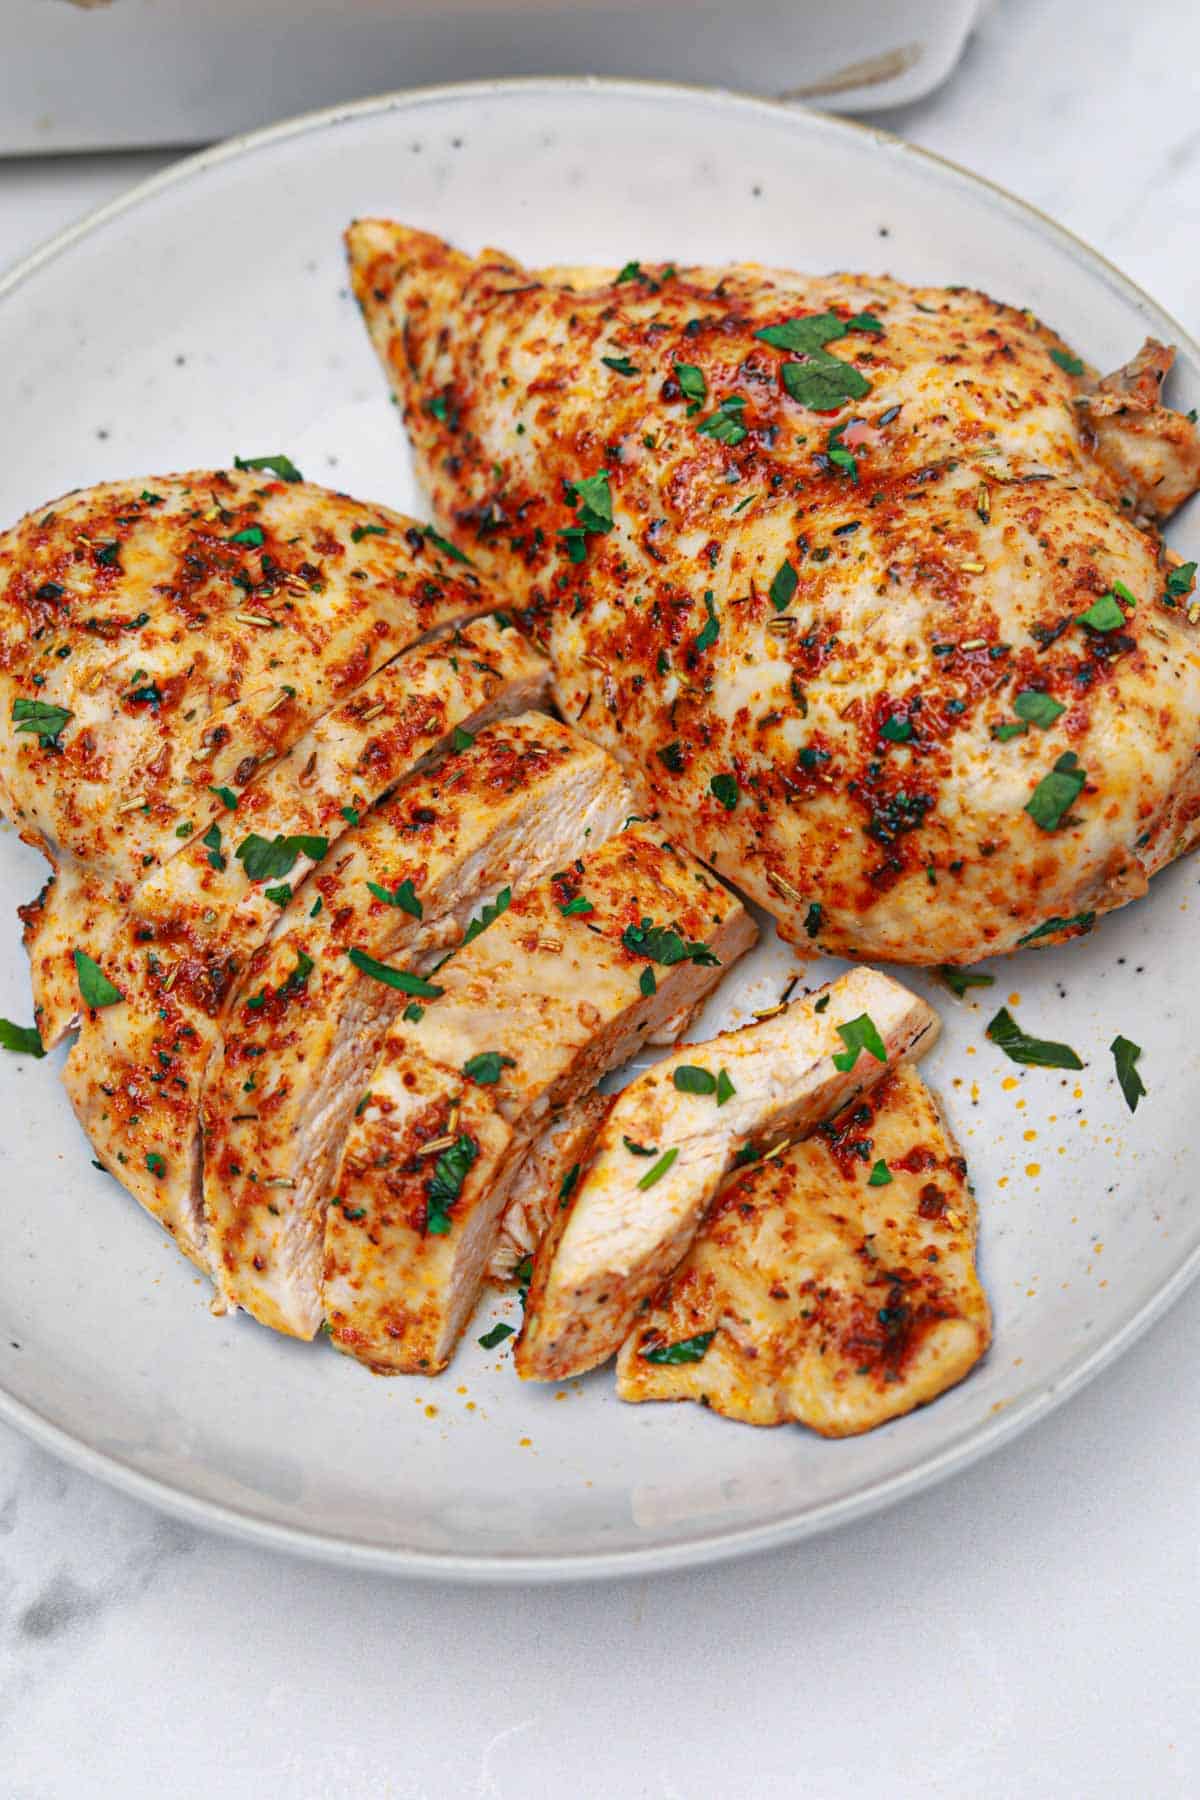 oven baked boneless chicken breasts served on a plate.